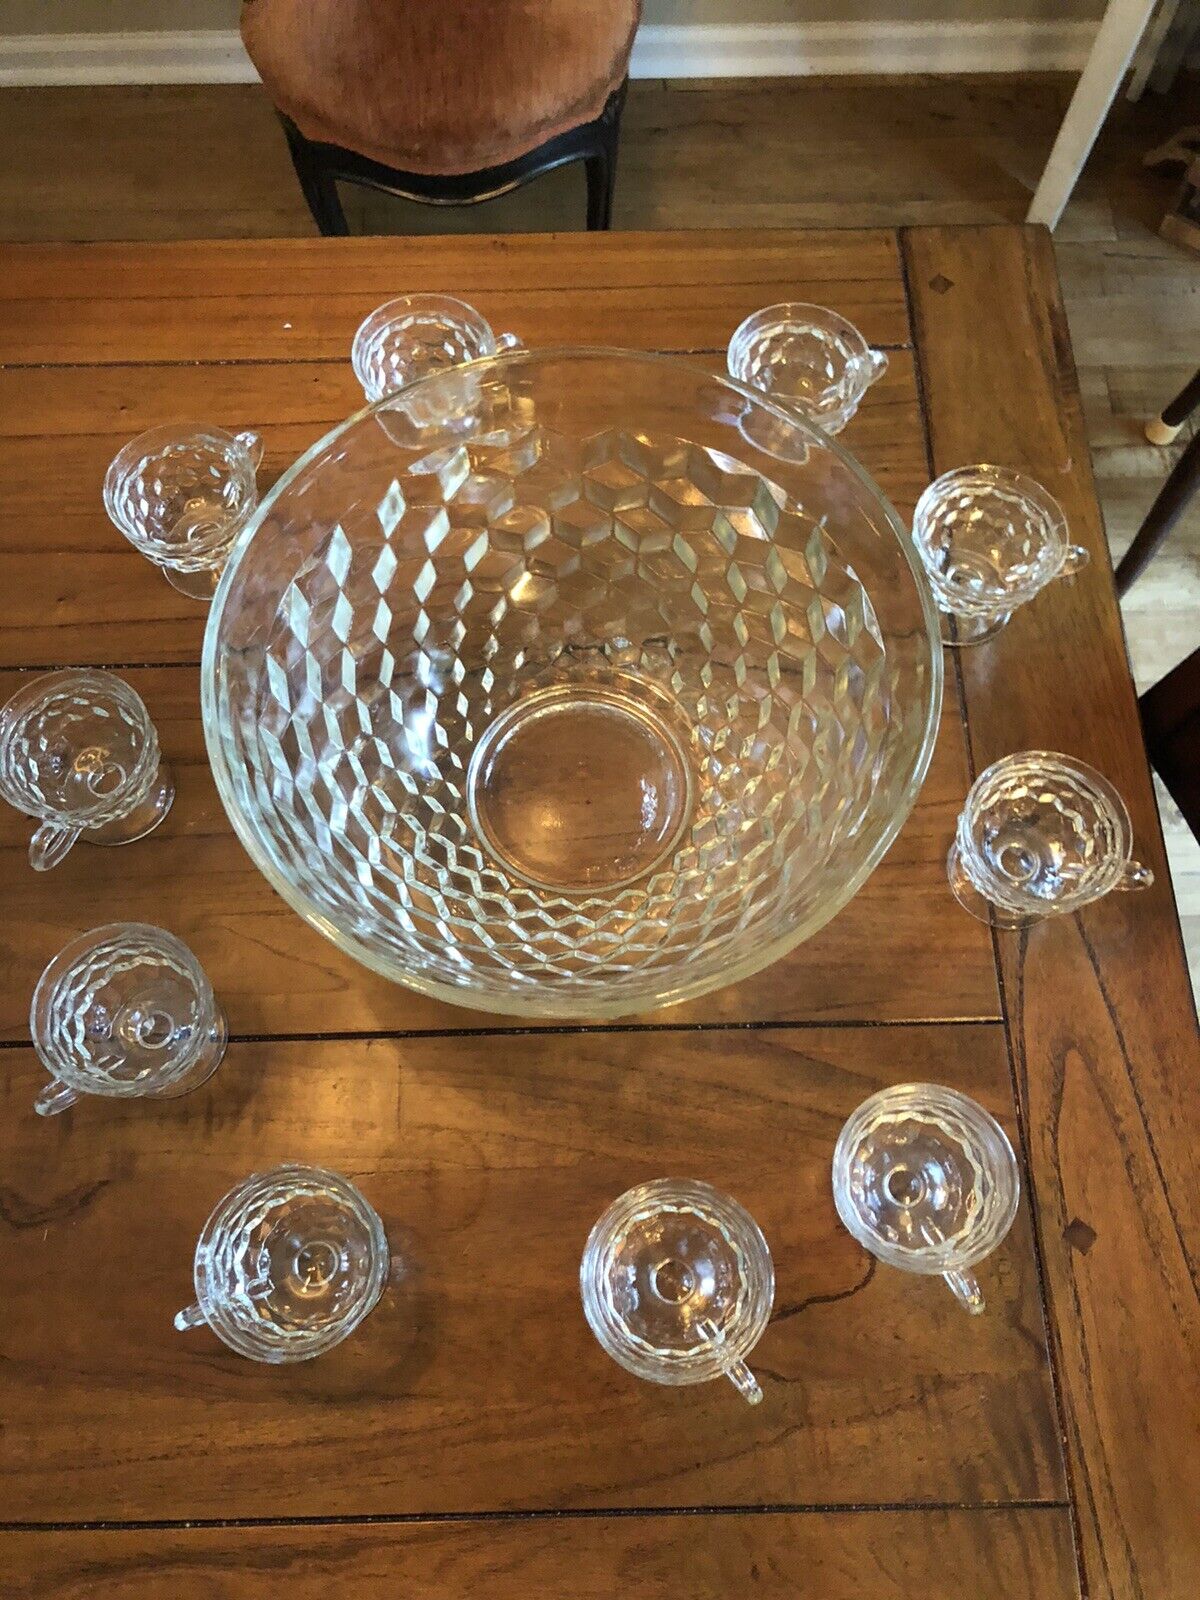 American Fostoria Vintage Punch Bowl With Cups